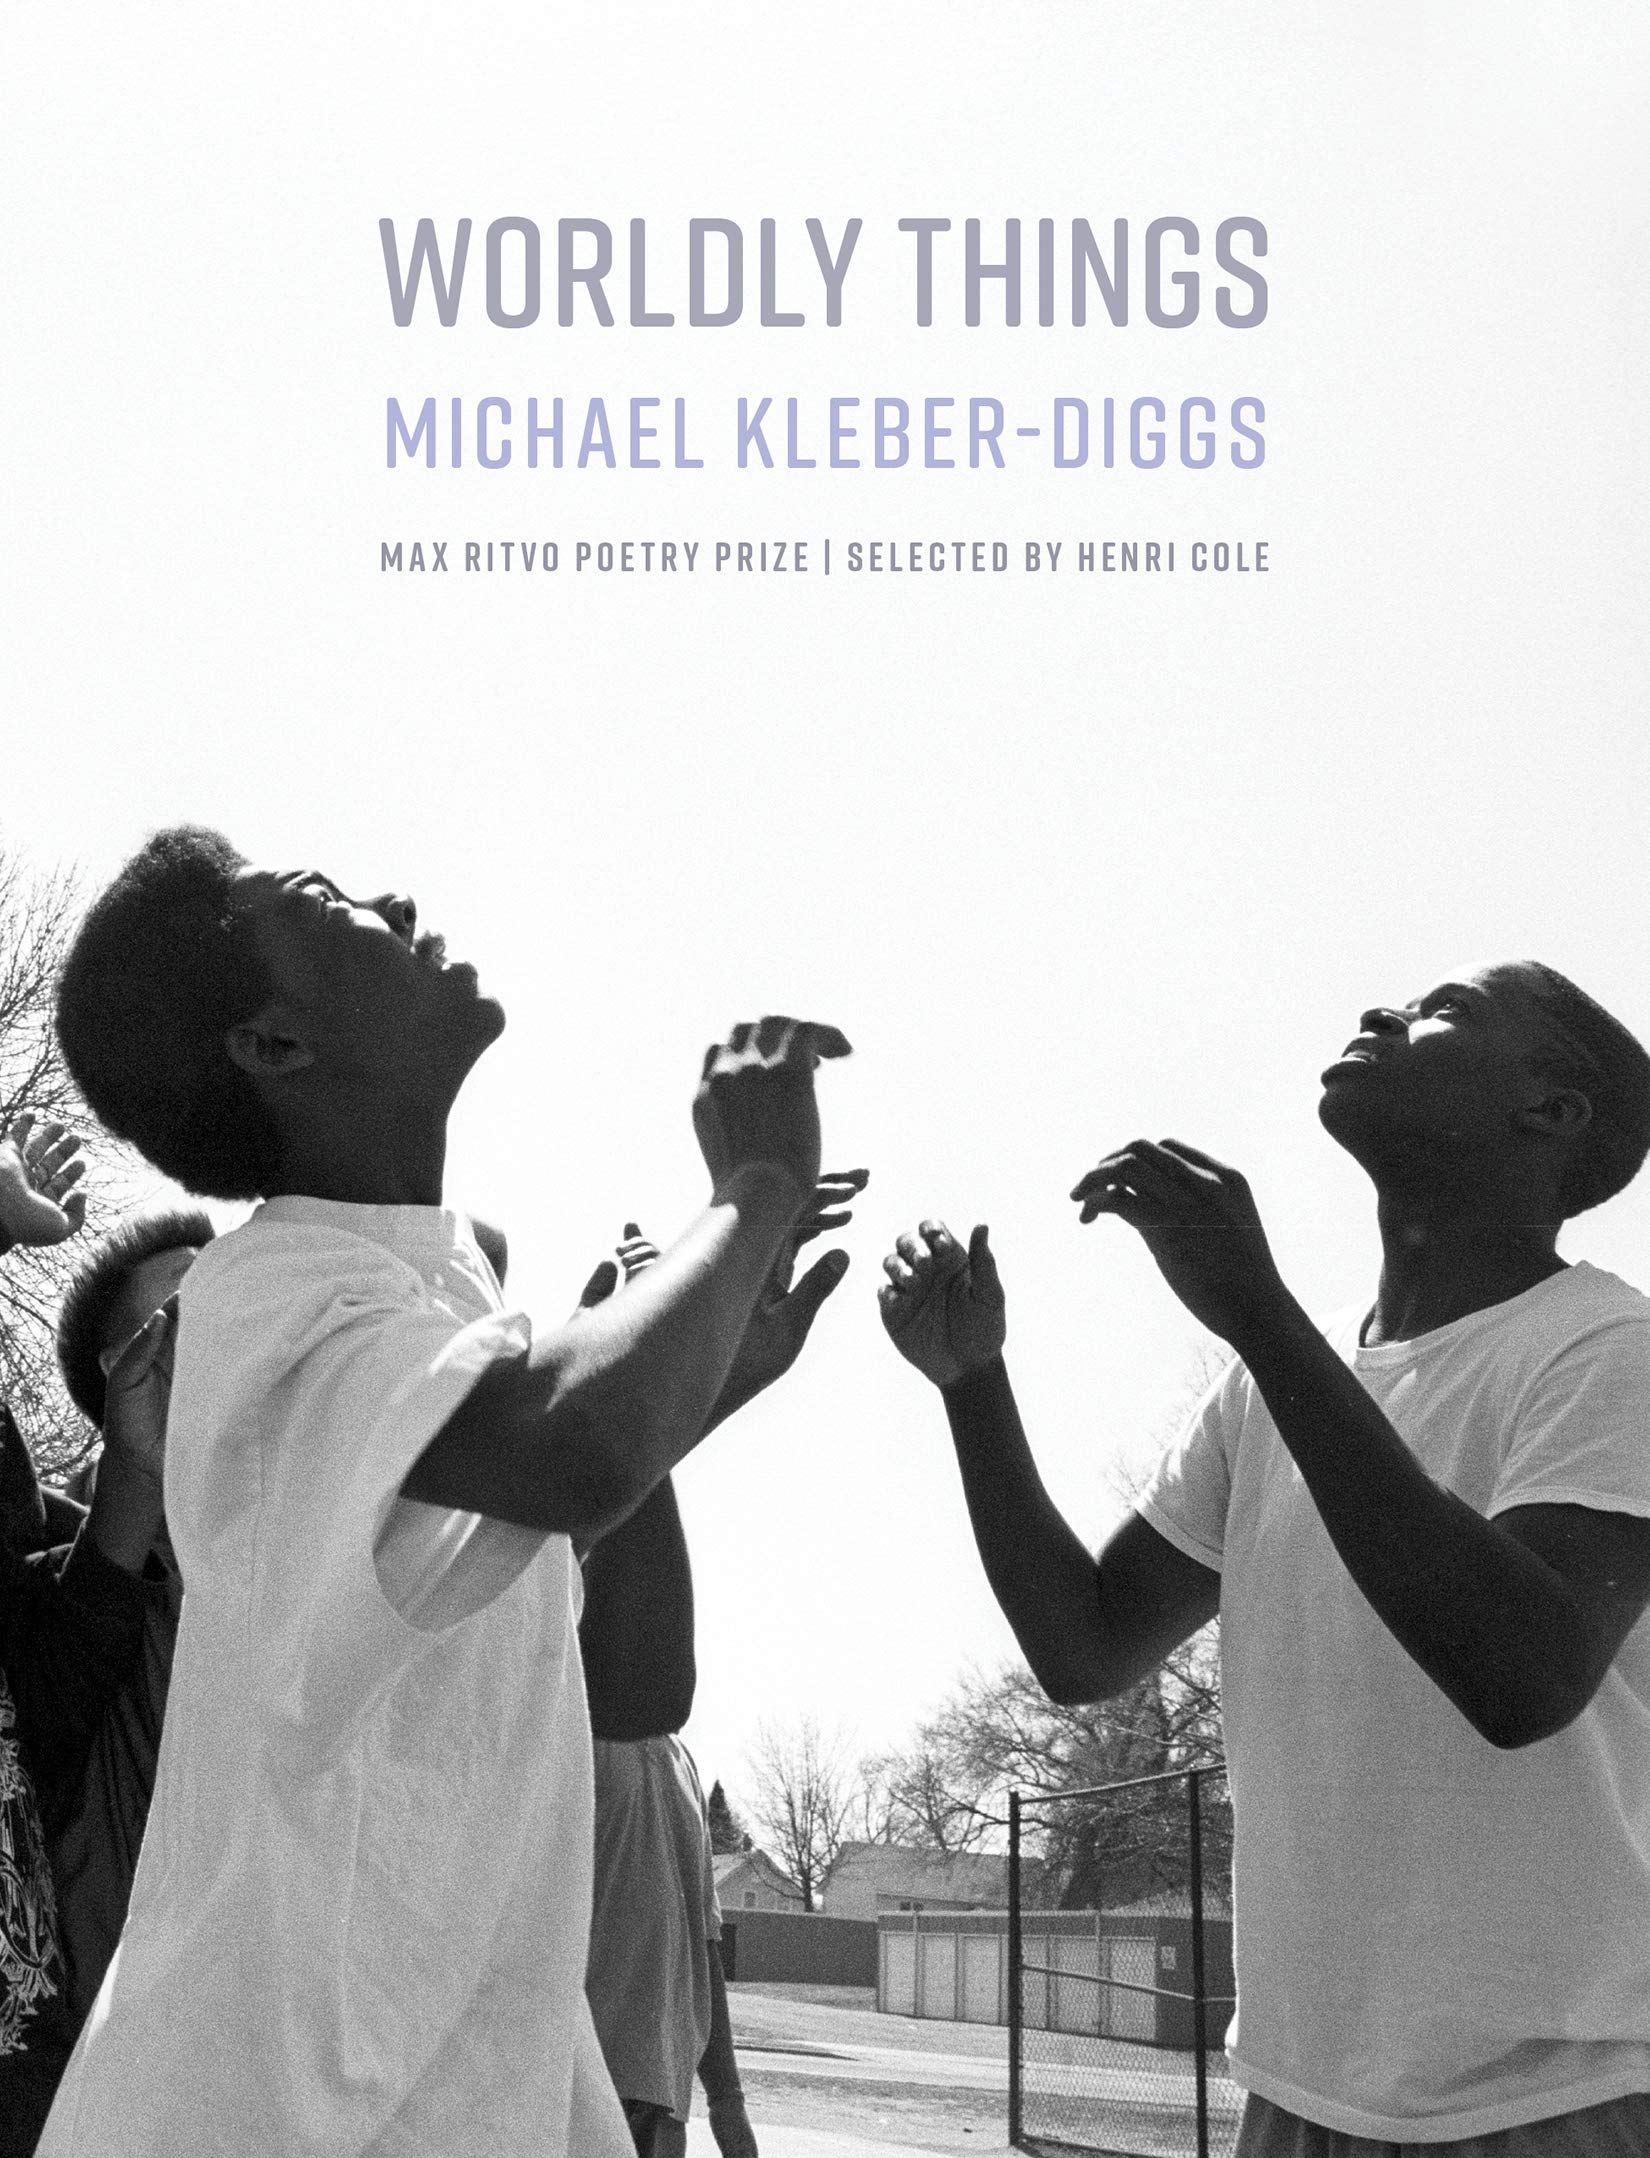 worldly things by michael kleber-diggs book cover